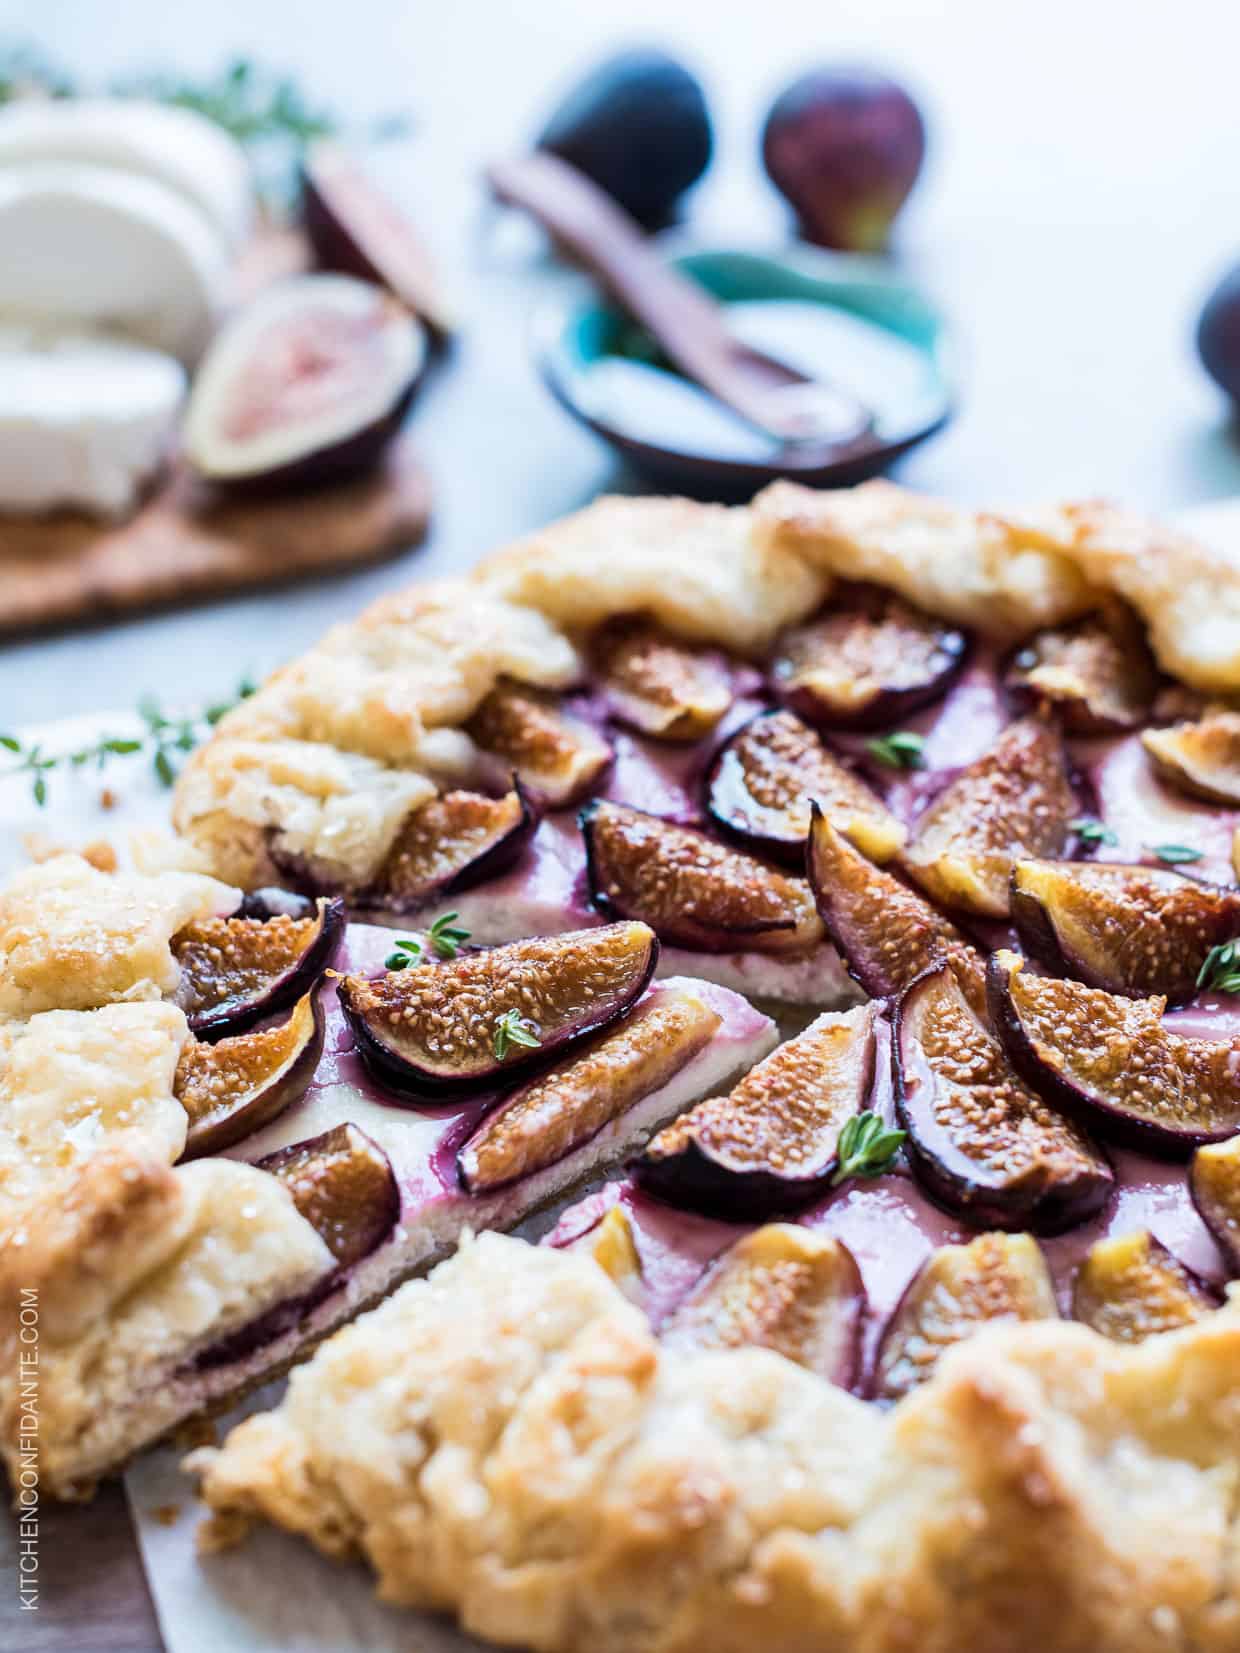 Fig, Honey and Goat Cheese Galette is a fig lover's dream. Nestled in a flaky, buttery crust are sweet figs, tangy goat cheese and sweet honey. Make it while fig season is here.